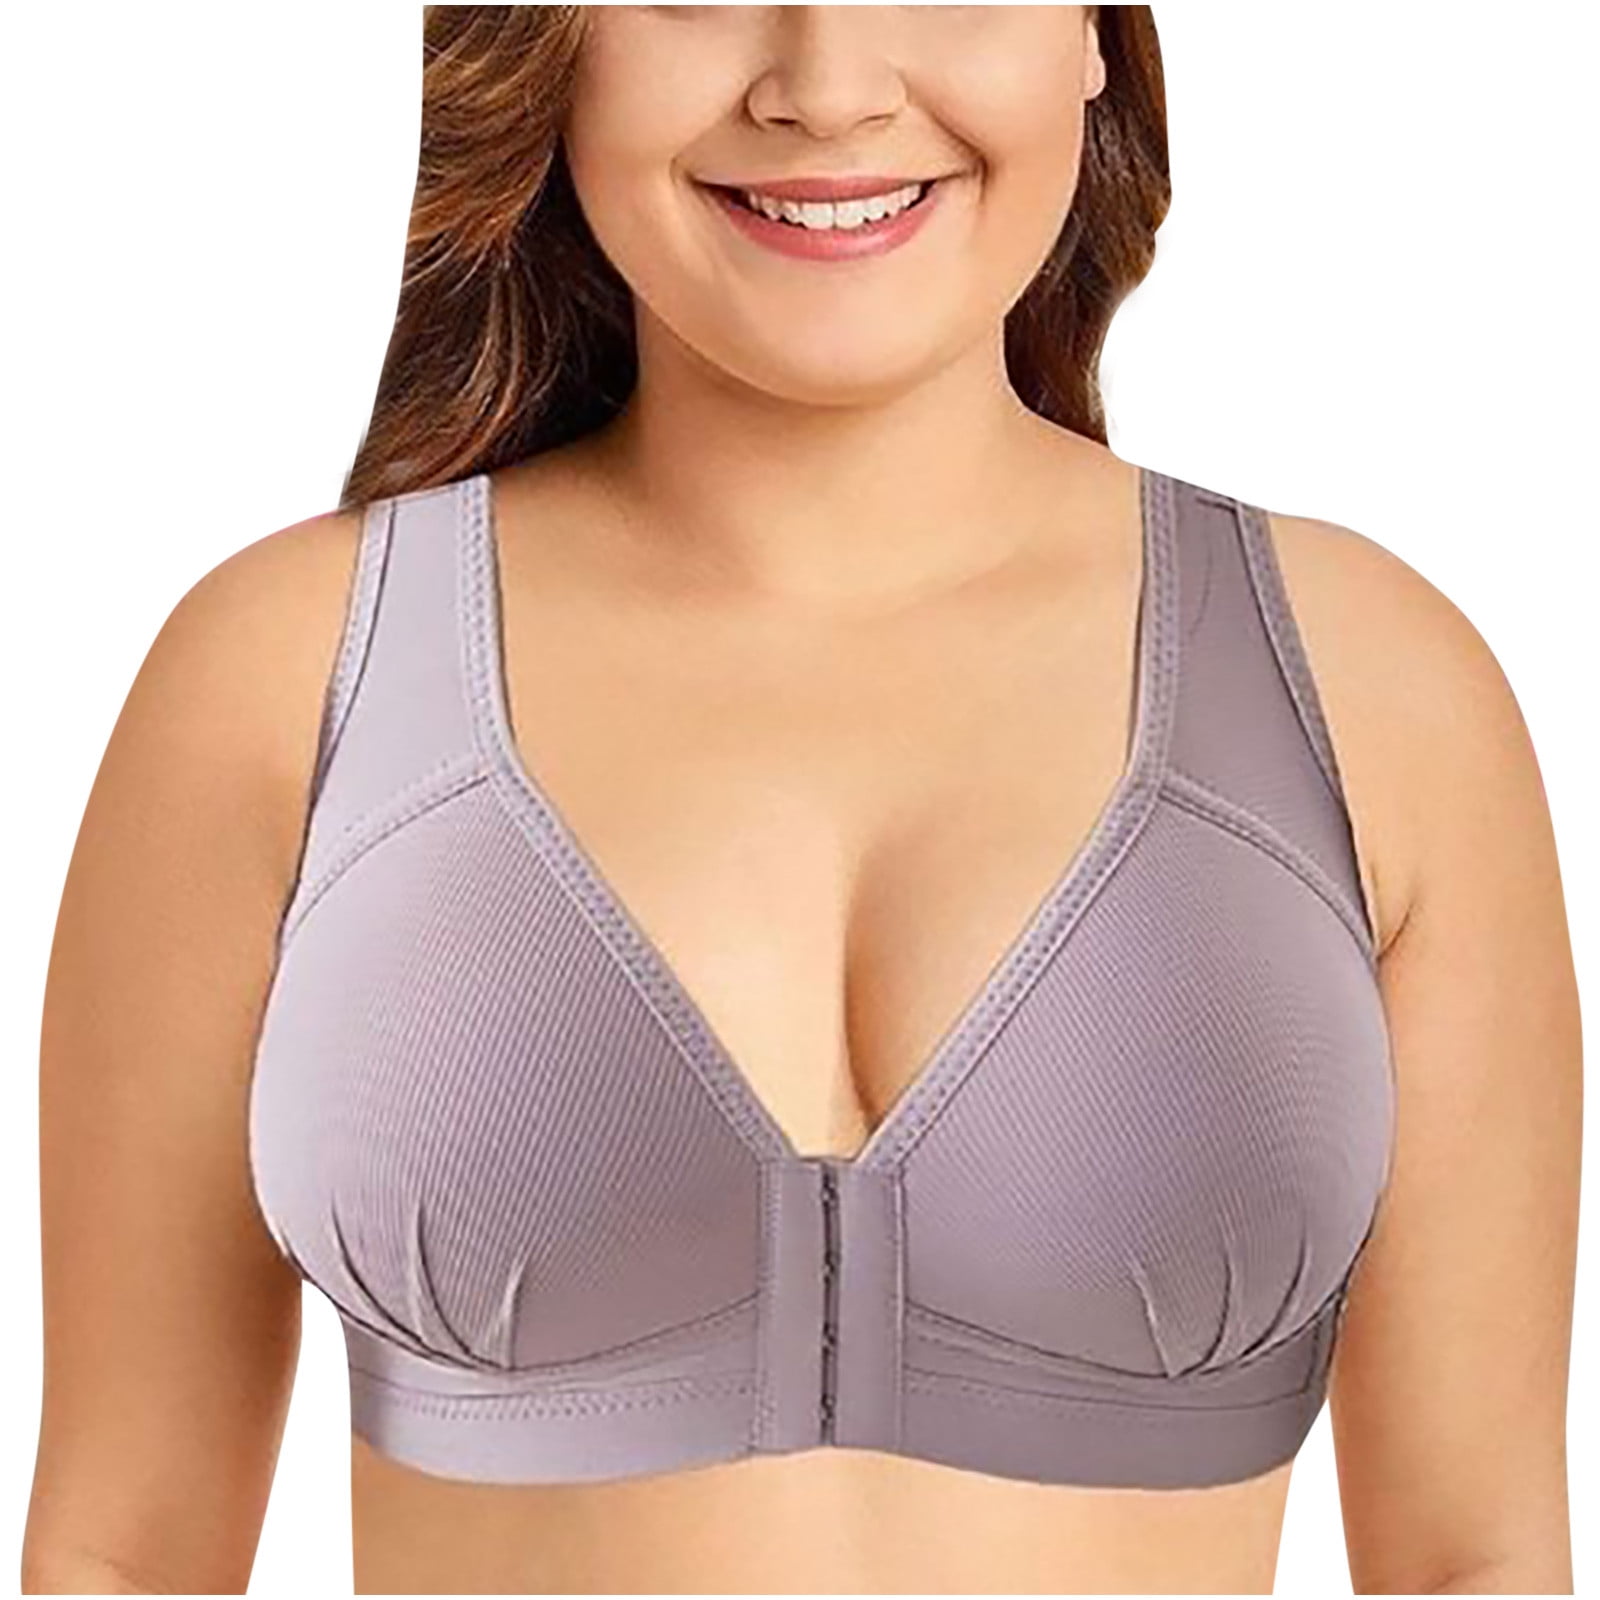 KDDYLITQ Push Up Bras 38dd Front Closure Bras for Women Plus Size Seniors  Padded Plus Size Front Button Bras for Women Beige M 